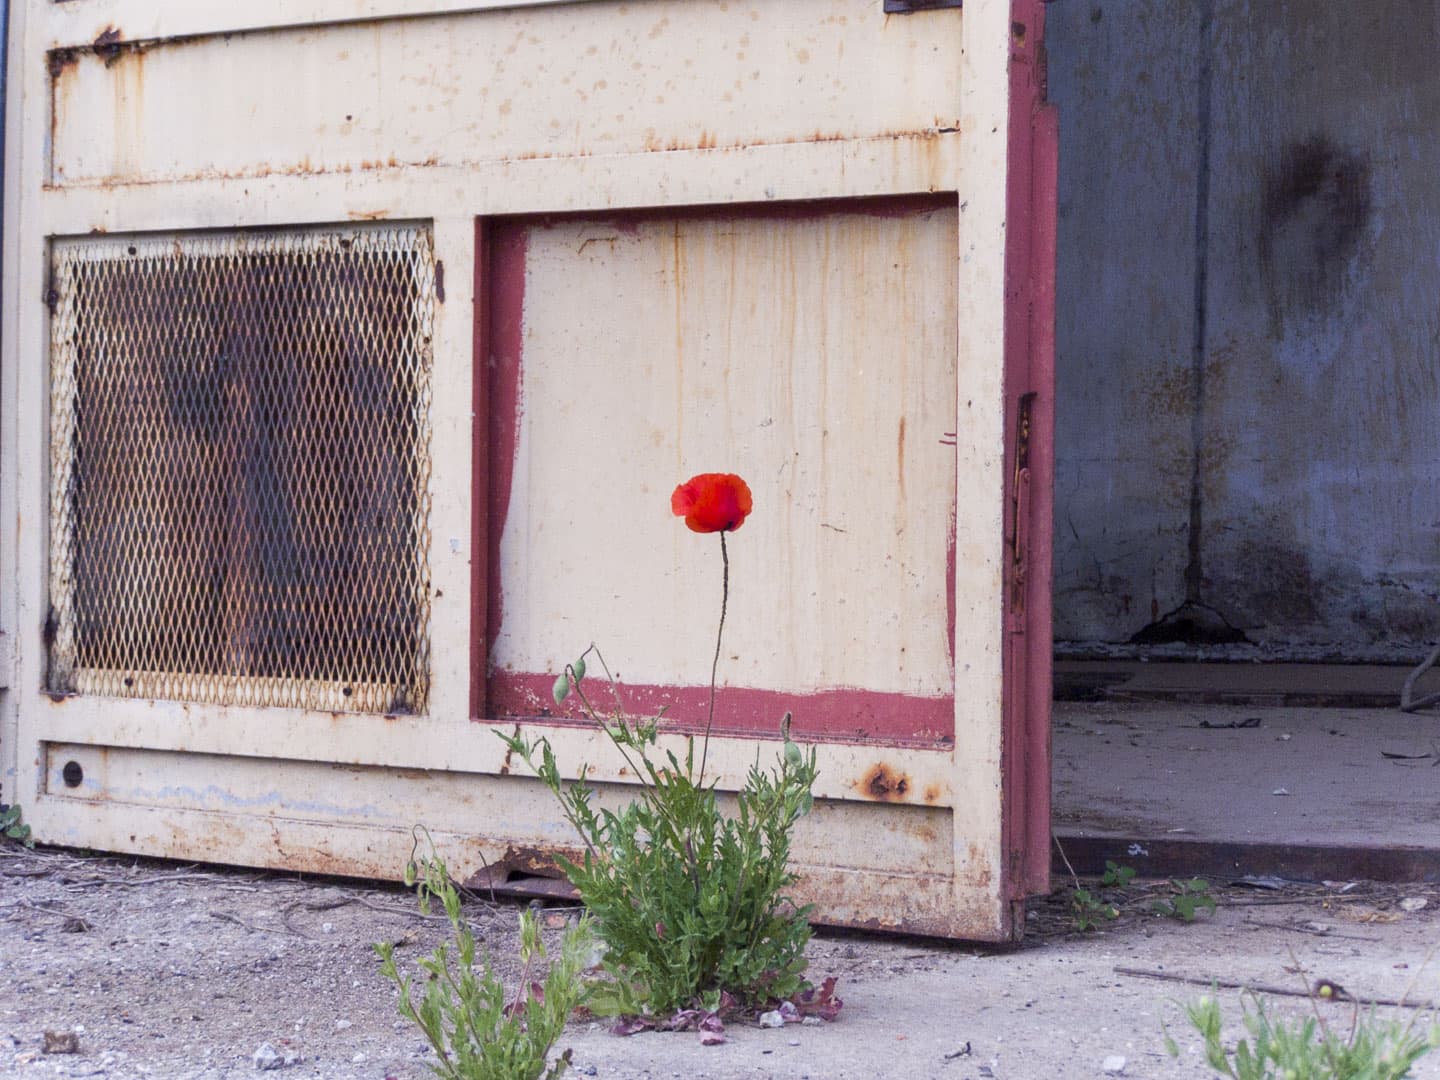 Poppy Flower at Unknown Abandoned Factory in Nichelino, Italy